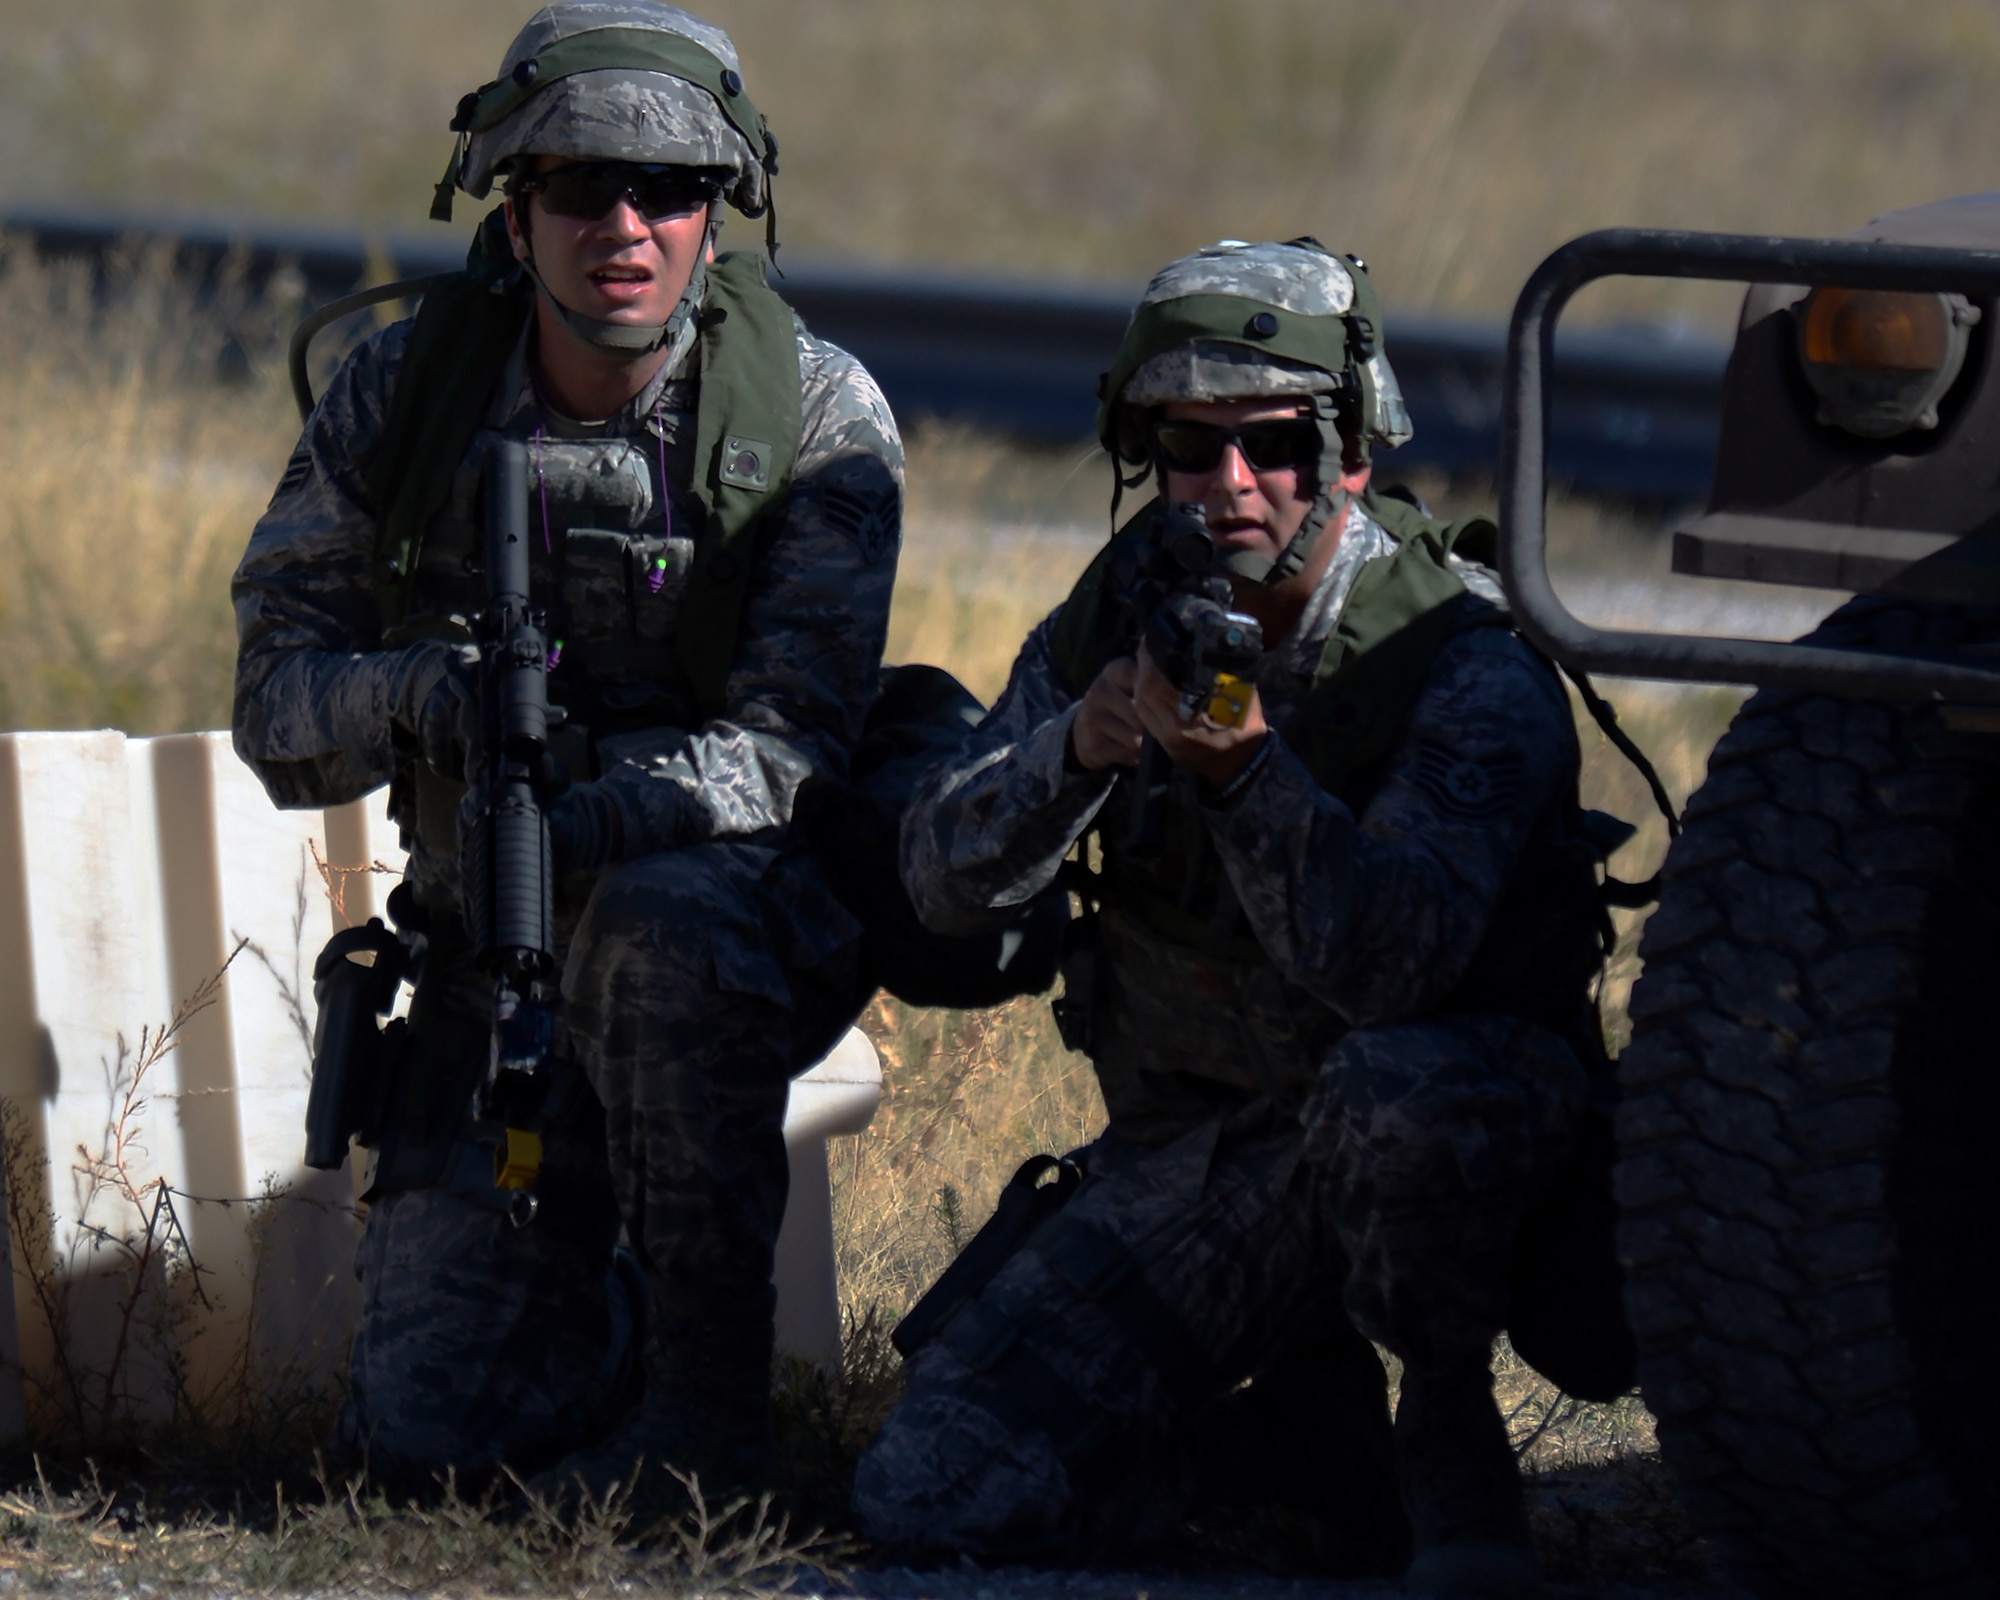 Senior Airman Chaz Thomas and Staff Sgt. Paul Downs, 307th Bomb Wing, Barksdale Air Force Base, La., use a Humvee for cover as they survey the area Sept. 24, 2015, during the tactical recapture portion of the 2015 Global Strike Challenge security forces competition at Camp Guernsey, Wyo. Teams had to search through a village for an asset that was stolen by opposing forces. (U.S. Air Force photo by Senior Airman Brandon Valle)